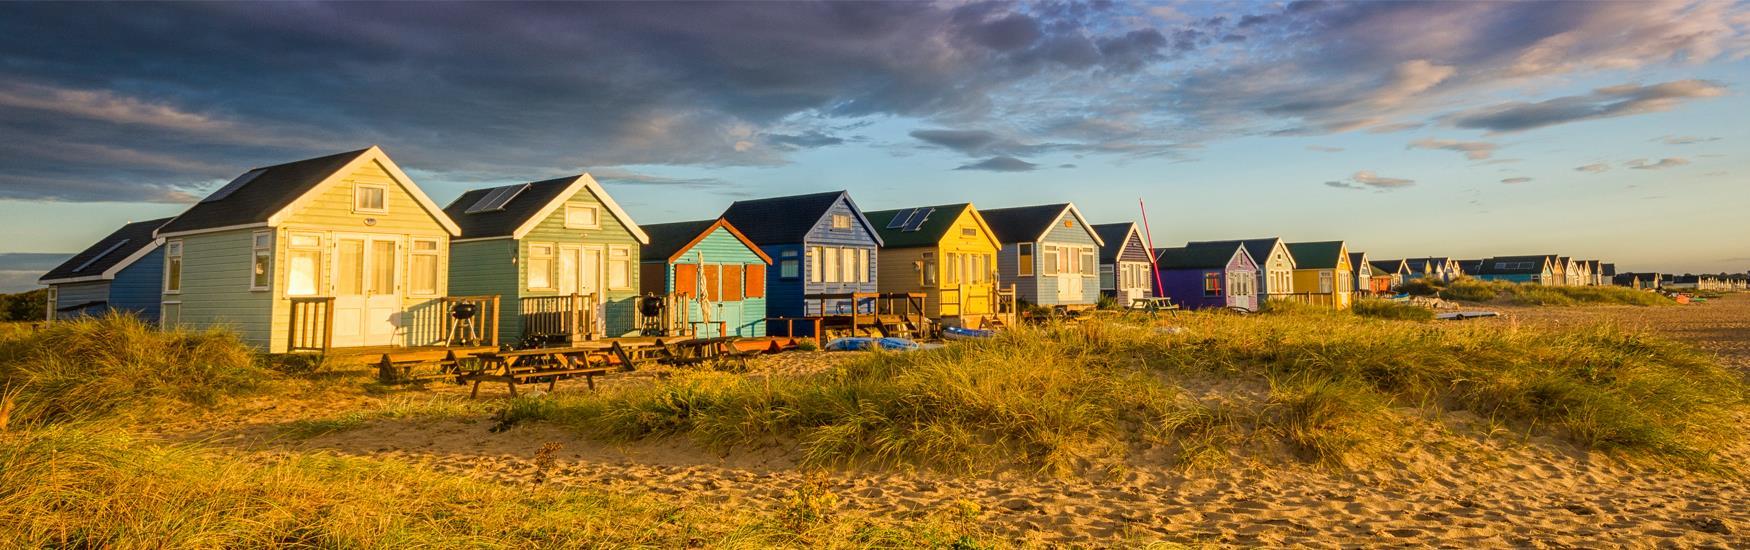 Sunset over the colourful array of beach huts located along a Christchurch beach